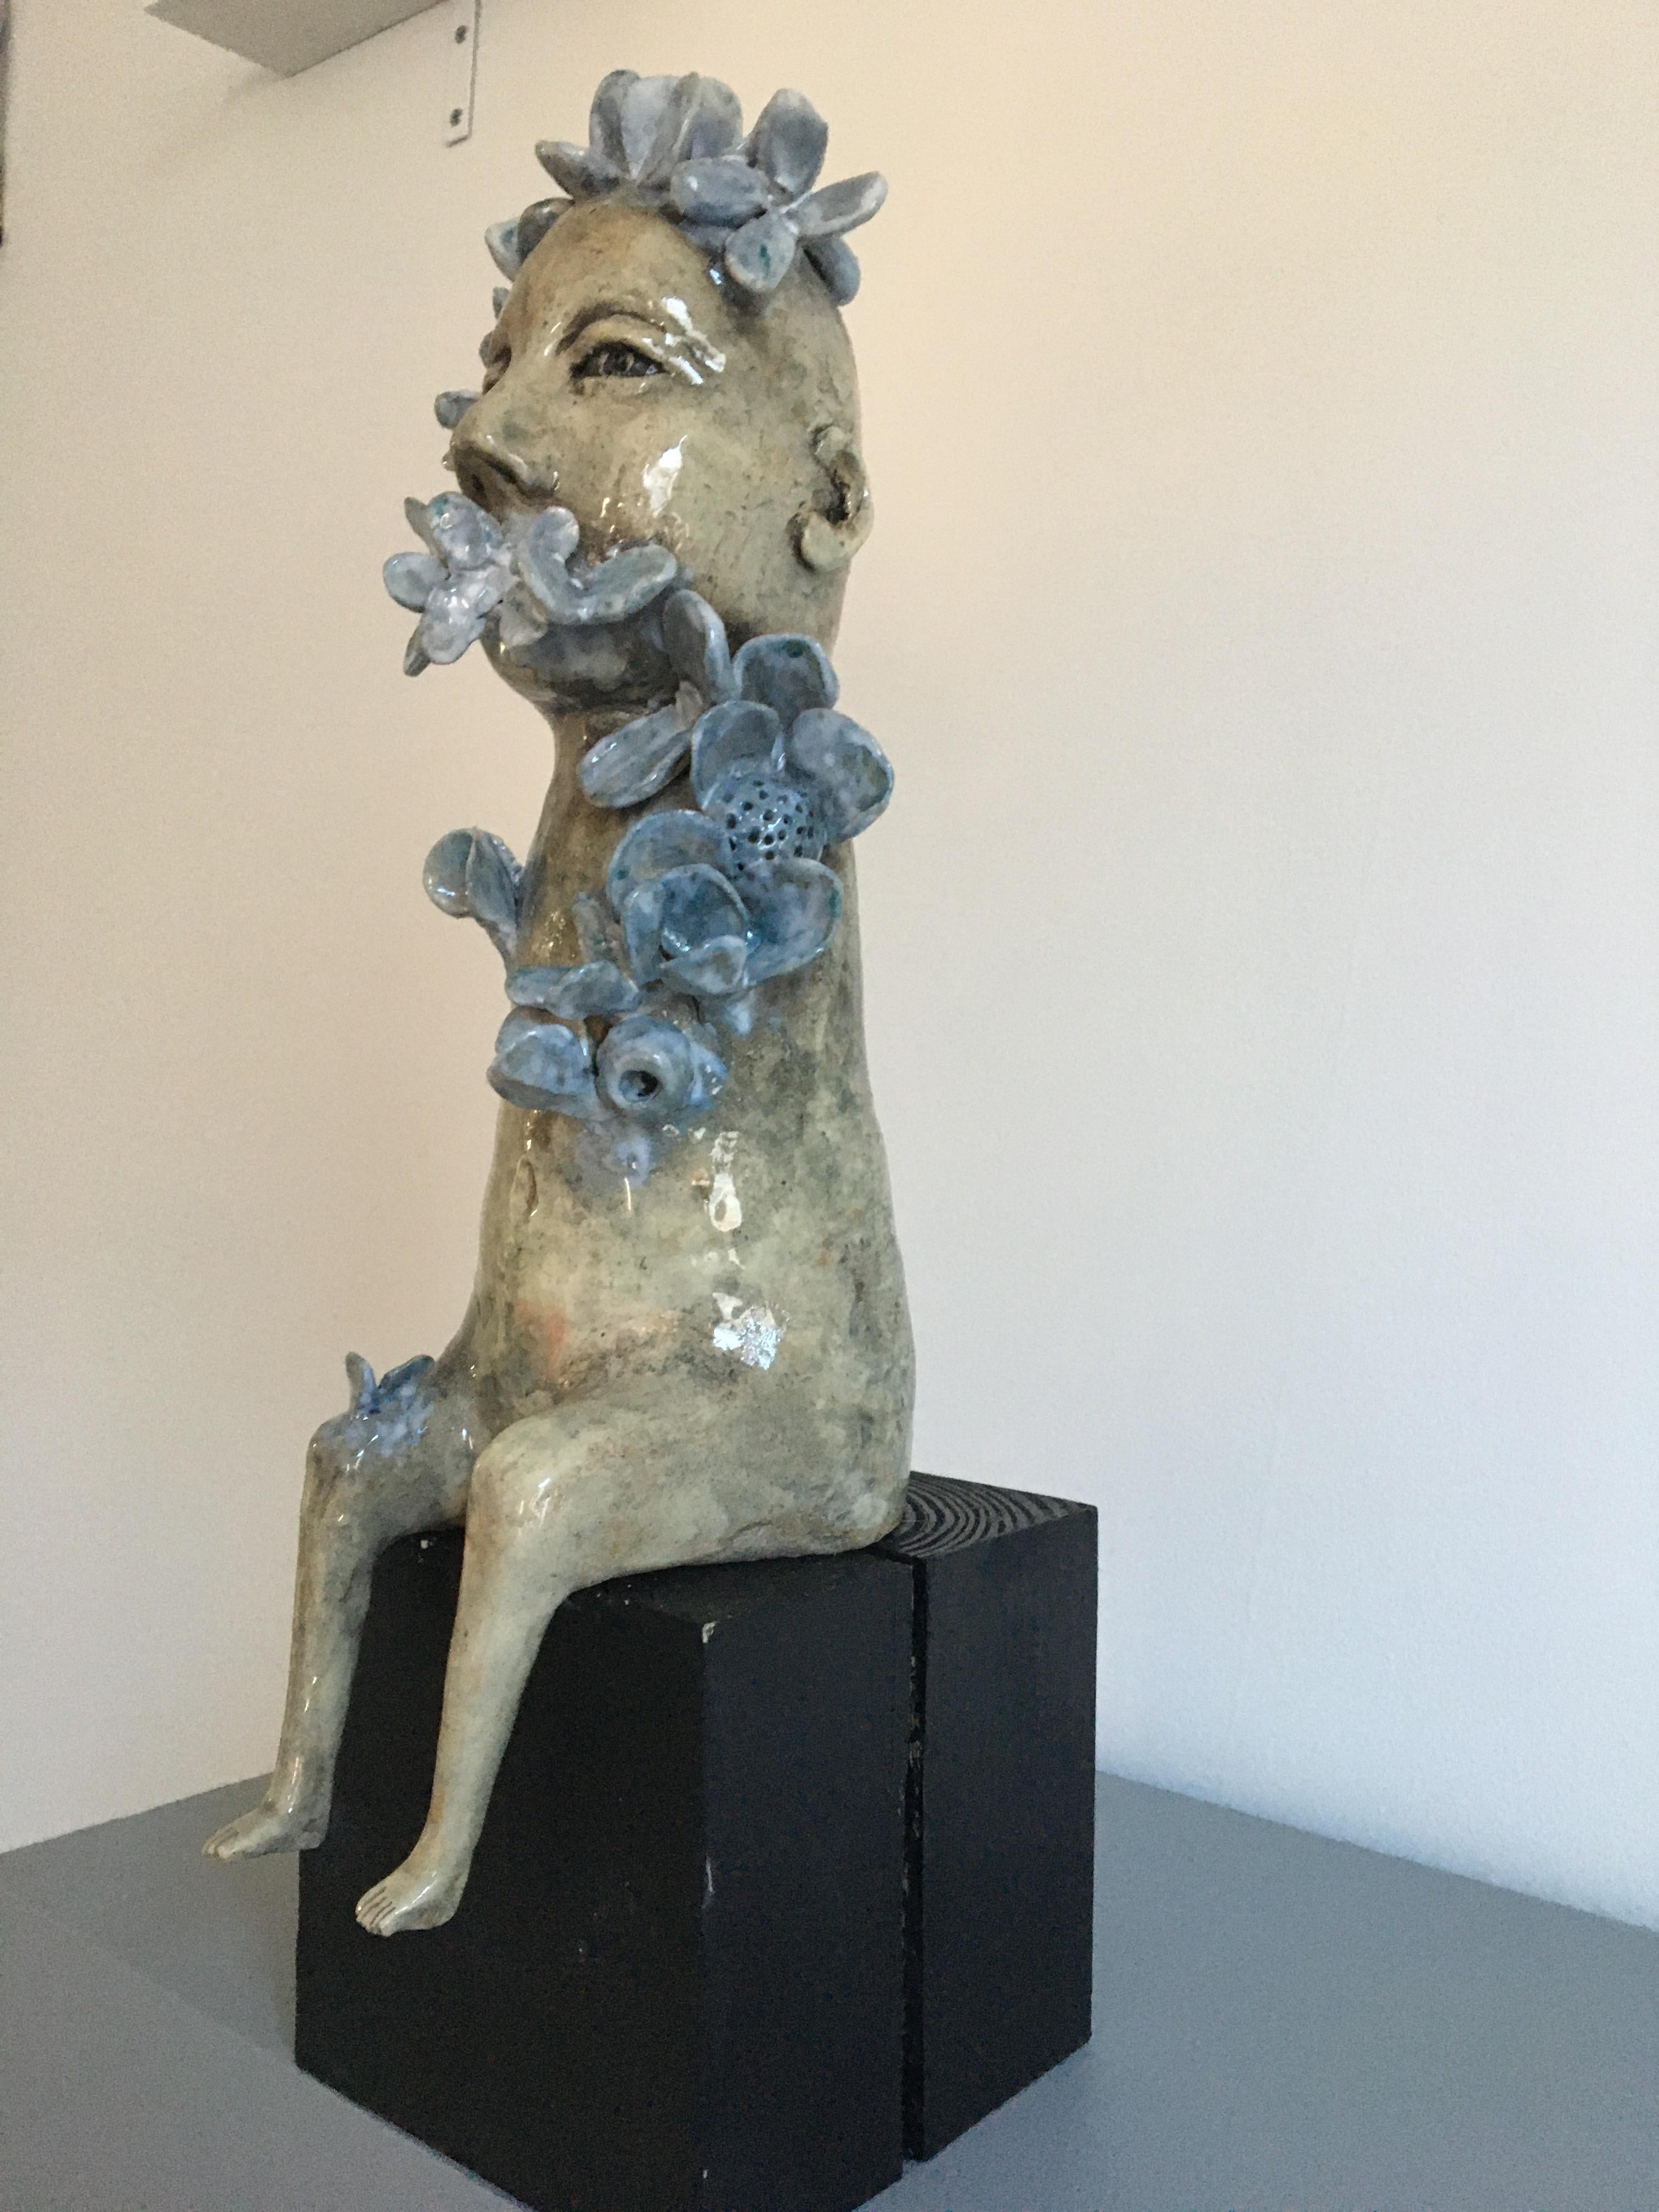 Ceramic figure: 'Let go of expectations and experience the subtle and unbounded' - Contemporary Sculpture by Ashley Benton